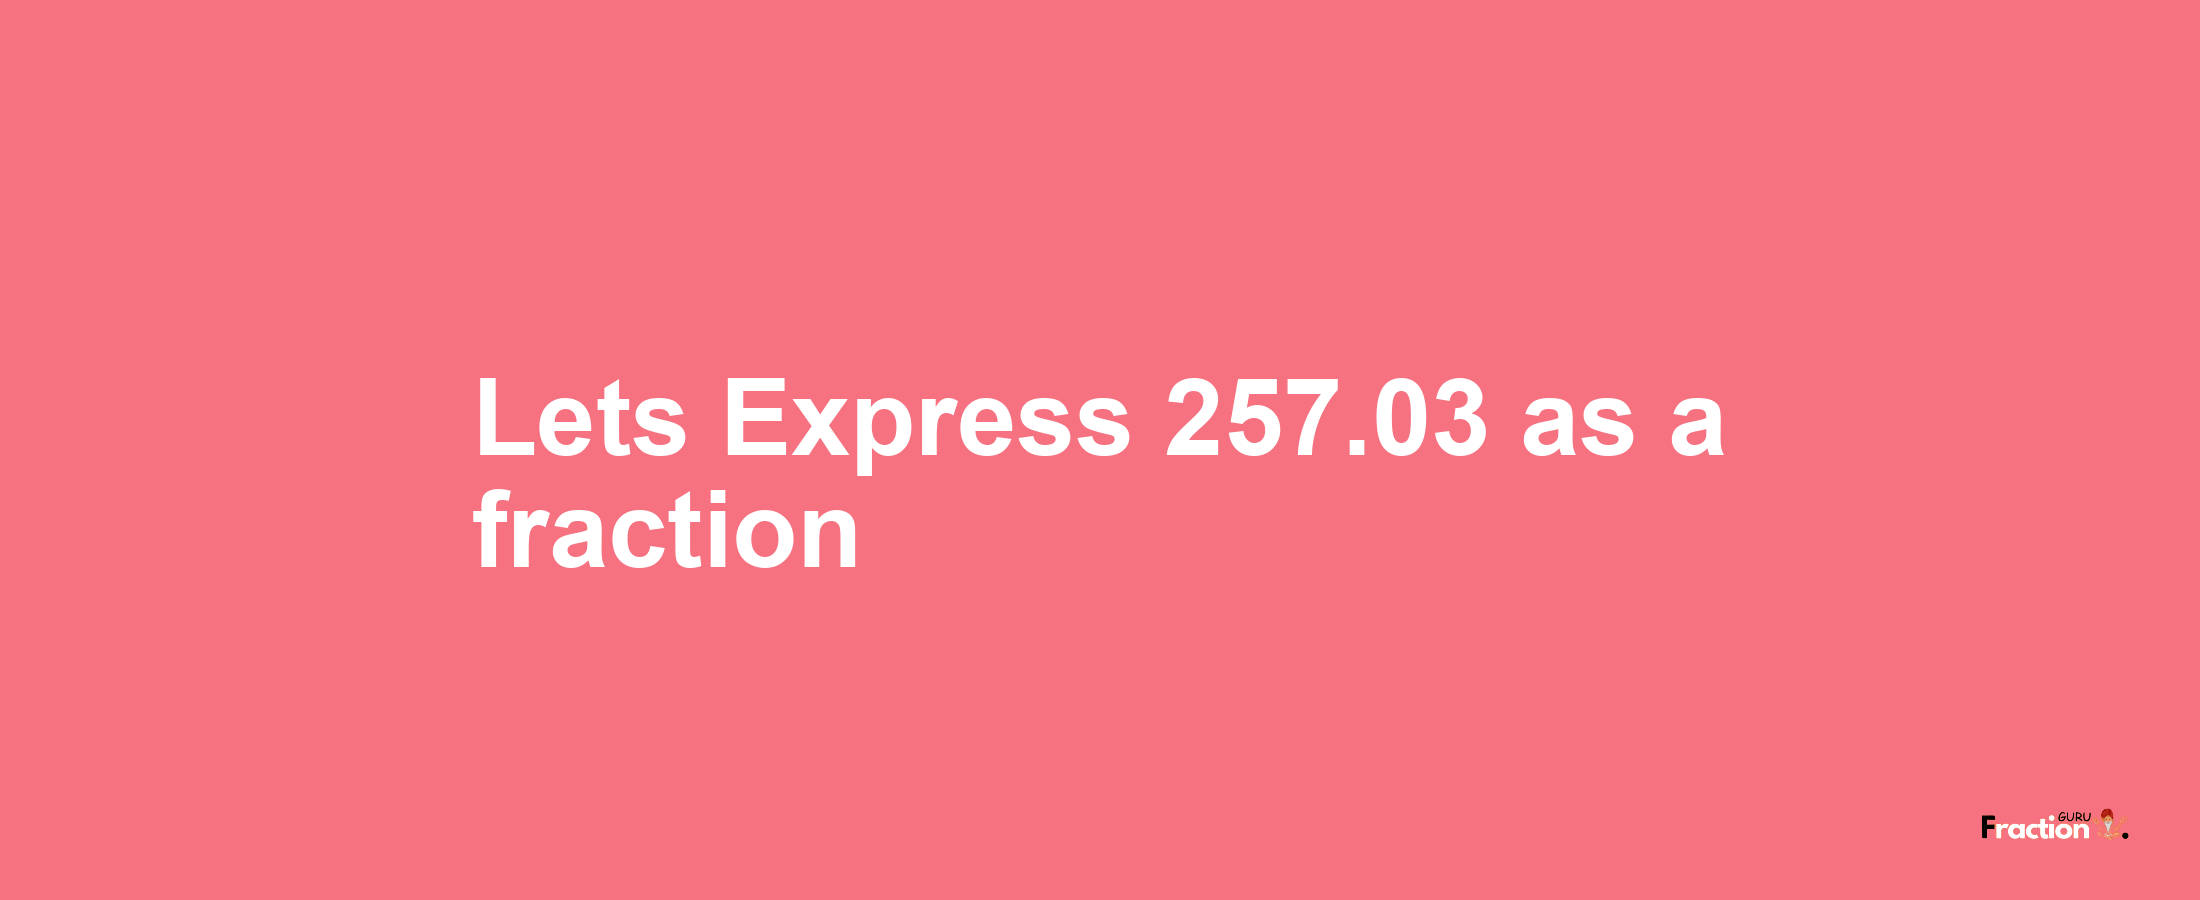 Lets Express 257.03 as afraction